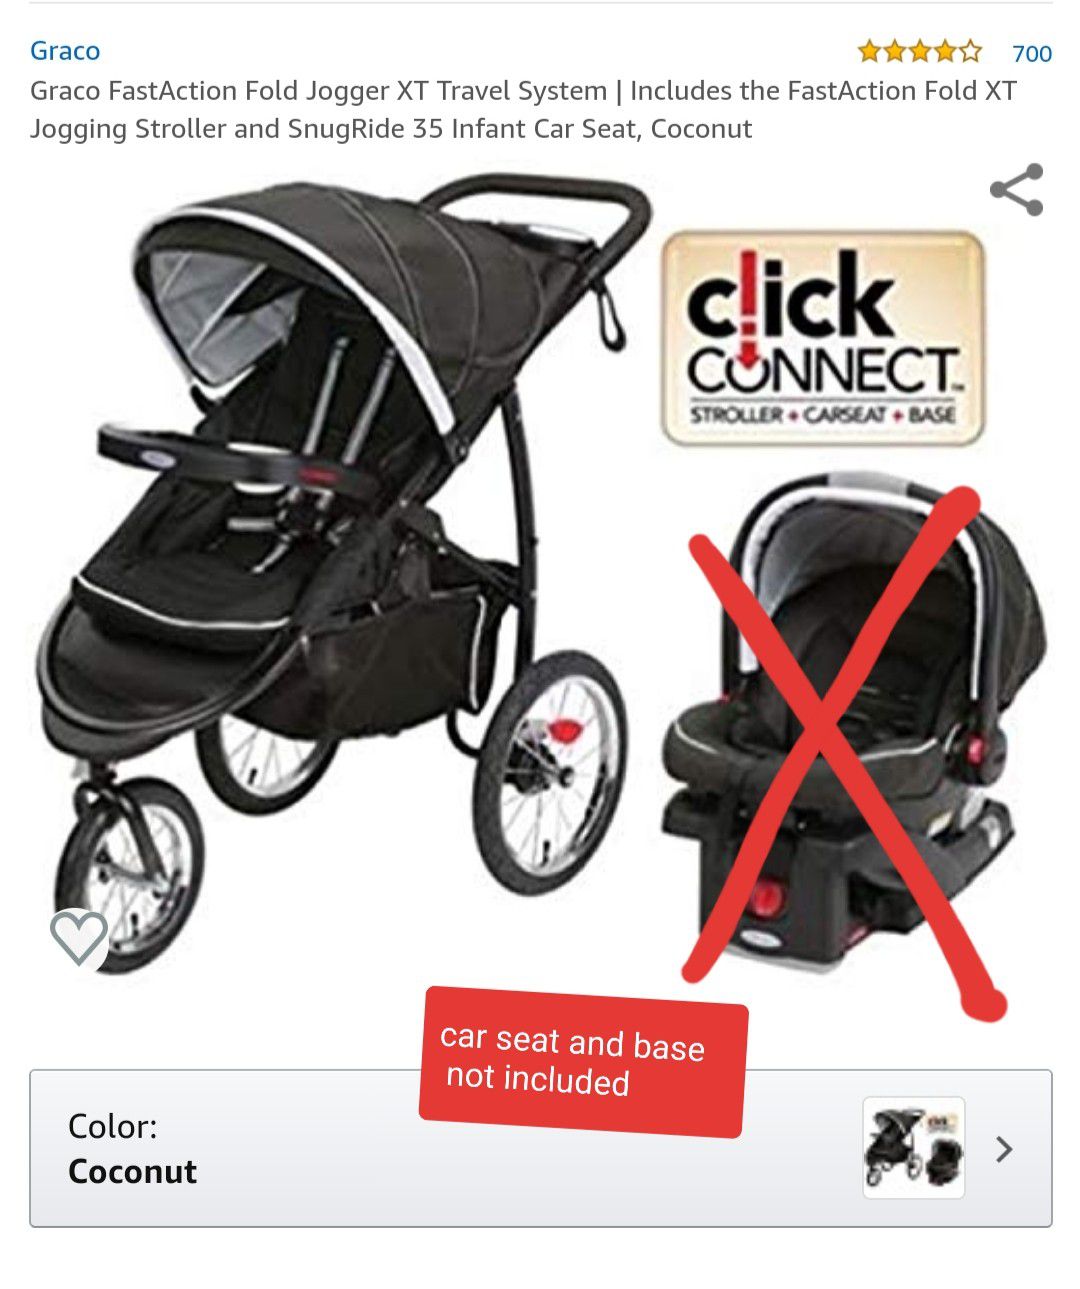 Graco FastAction Fold Jogger XT Travel System | Includes the FastAction Fold XT Jogging Stroller color is Coconut as pictured